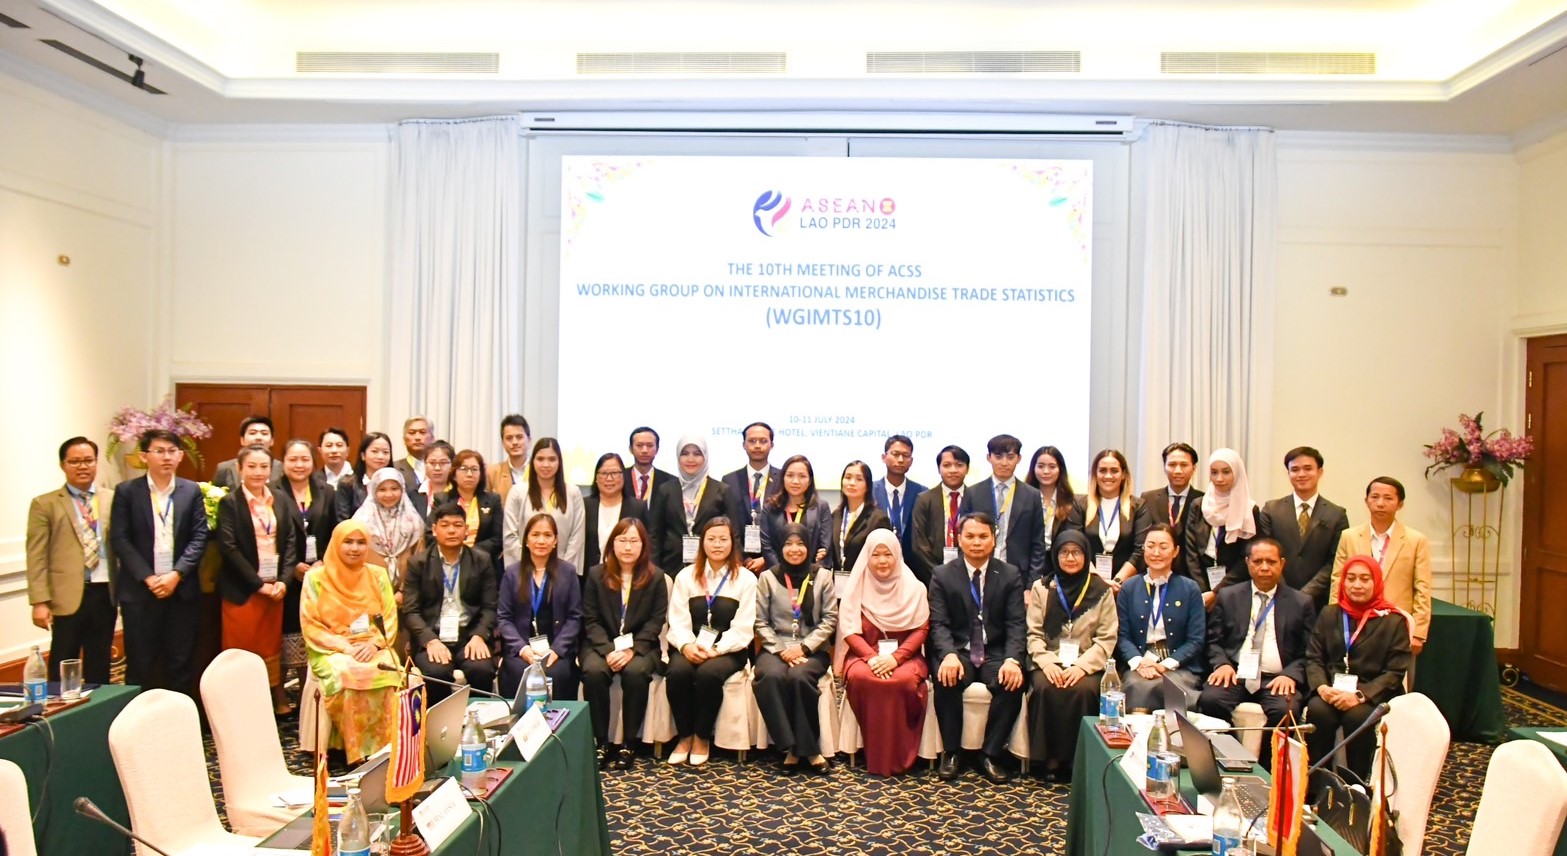 The 10th Meeting of ACSS Working Group on International Merchandise Trade Statistics (WGIMTS10)